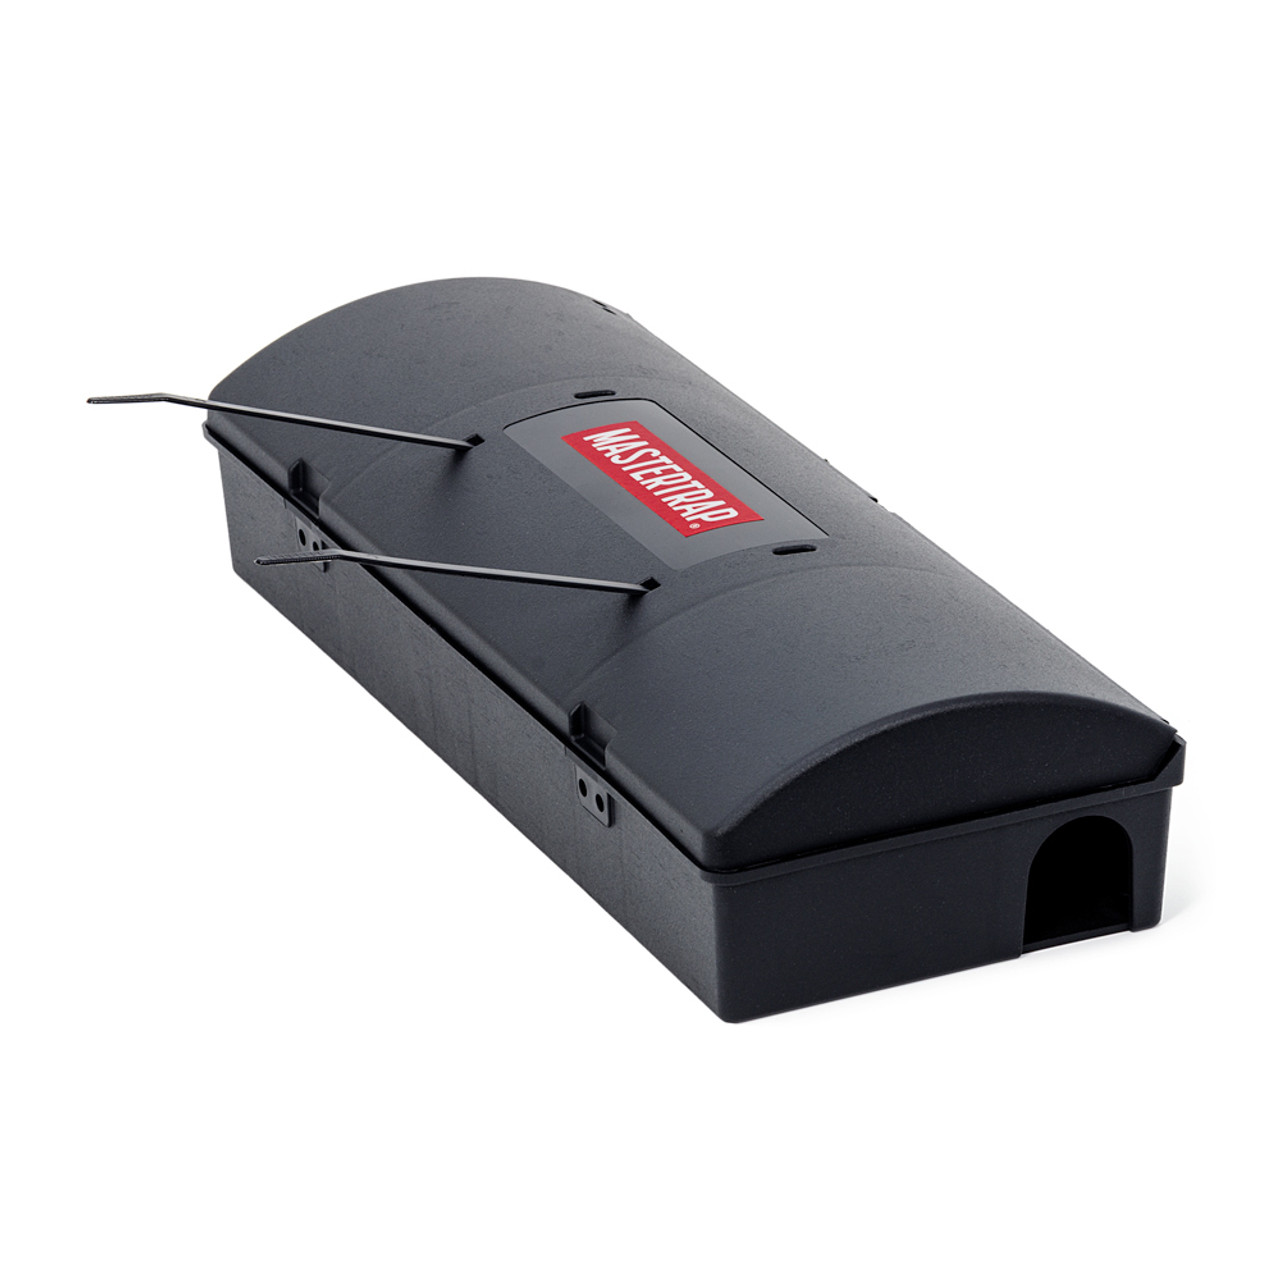 Mastertrap MX Rat and Mouse Bait Station Box with Two Traps